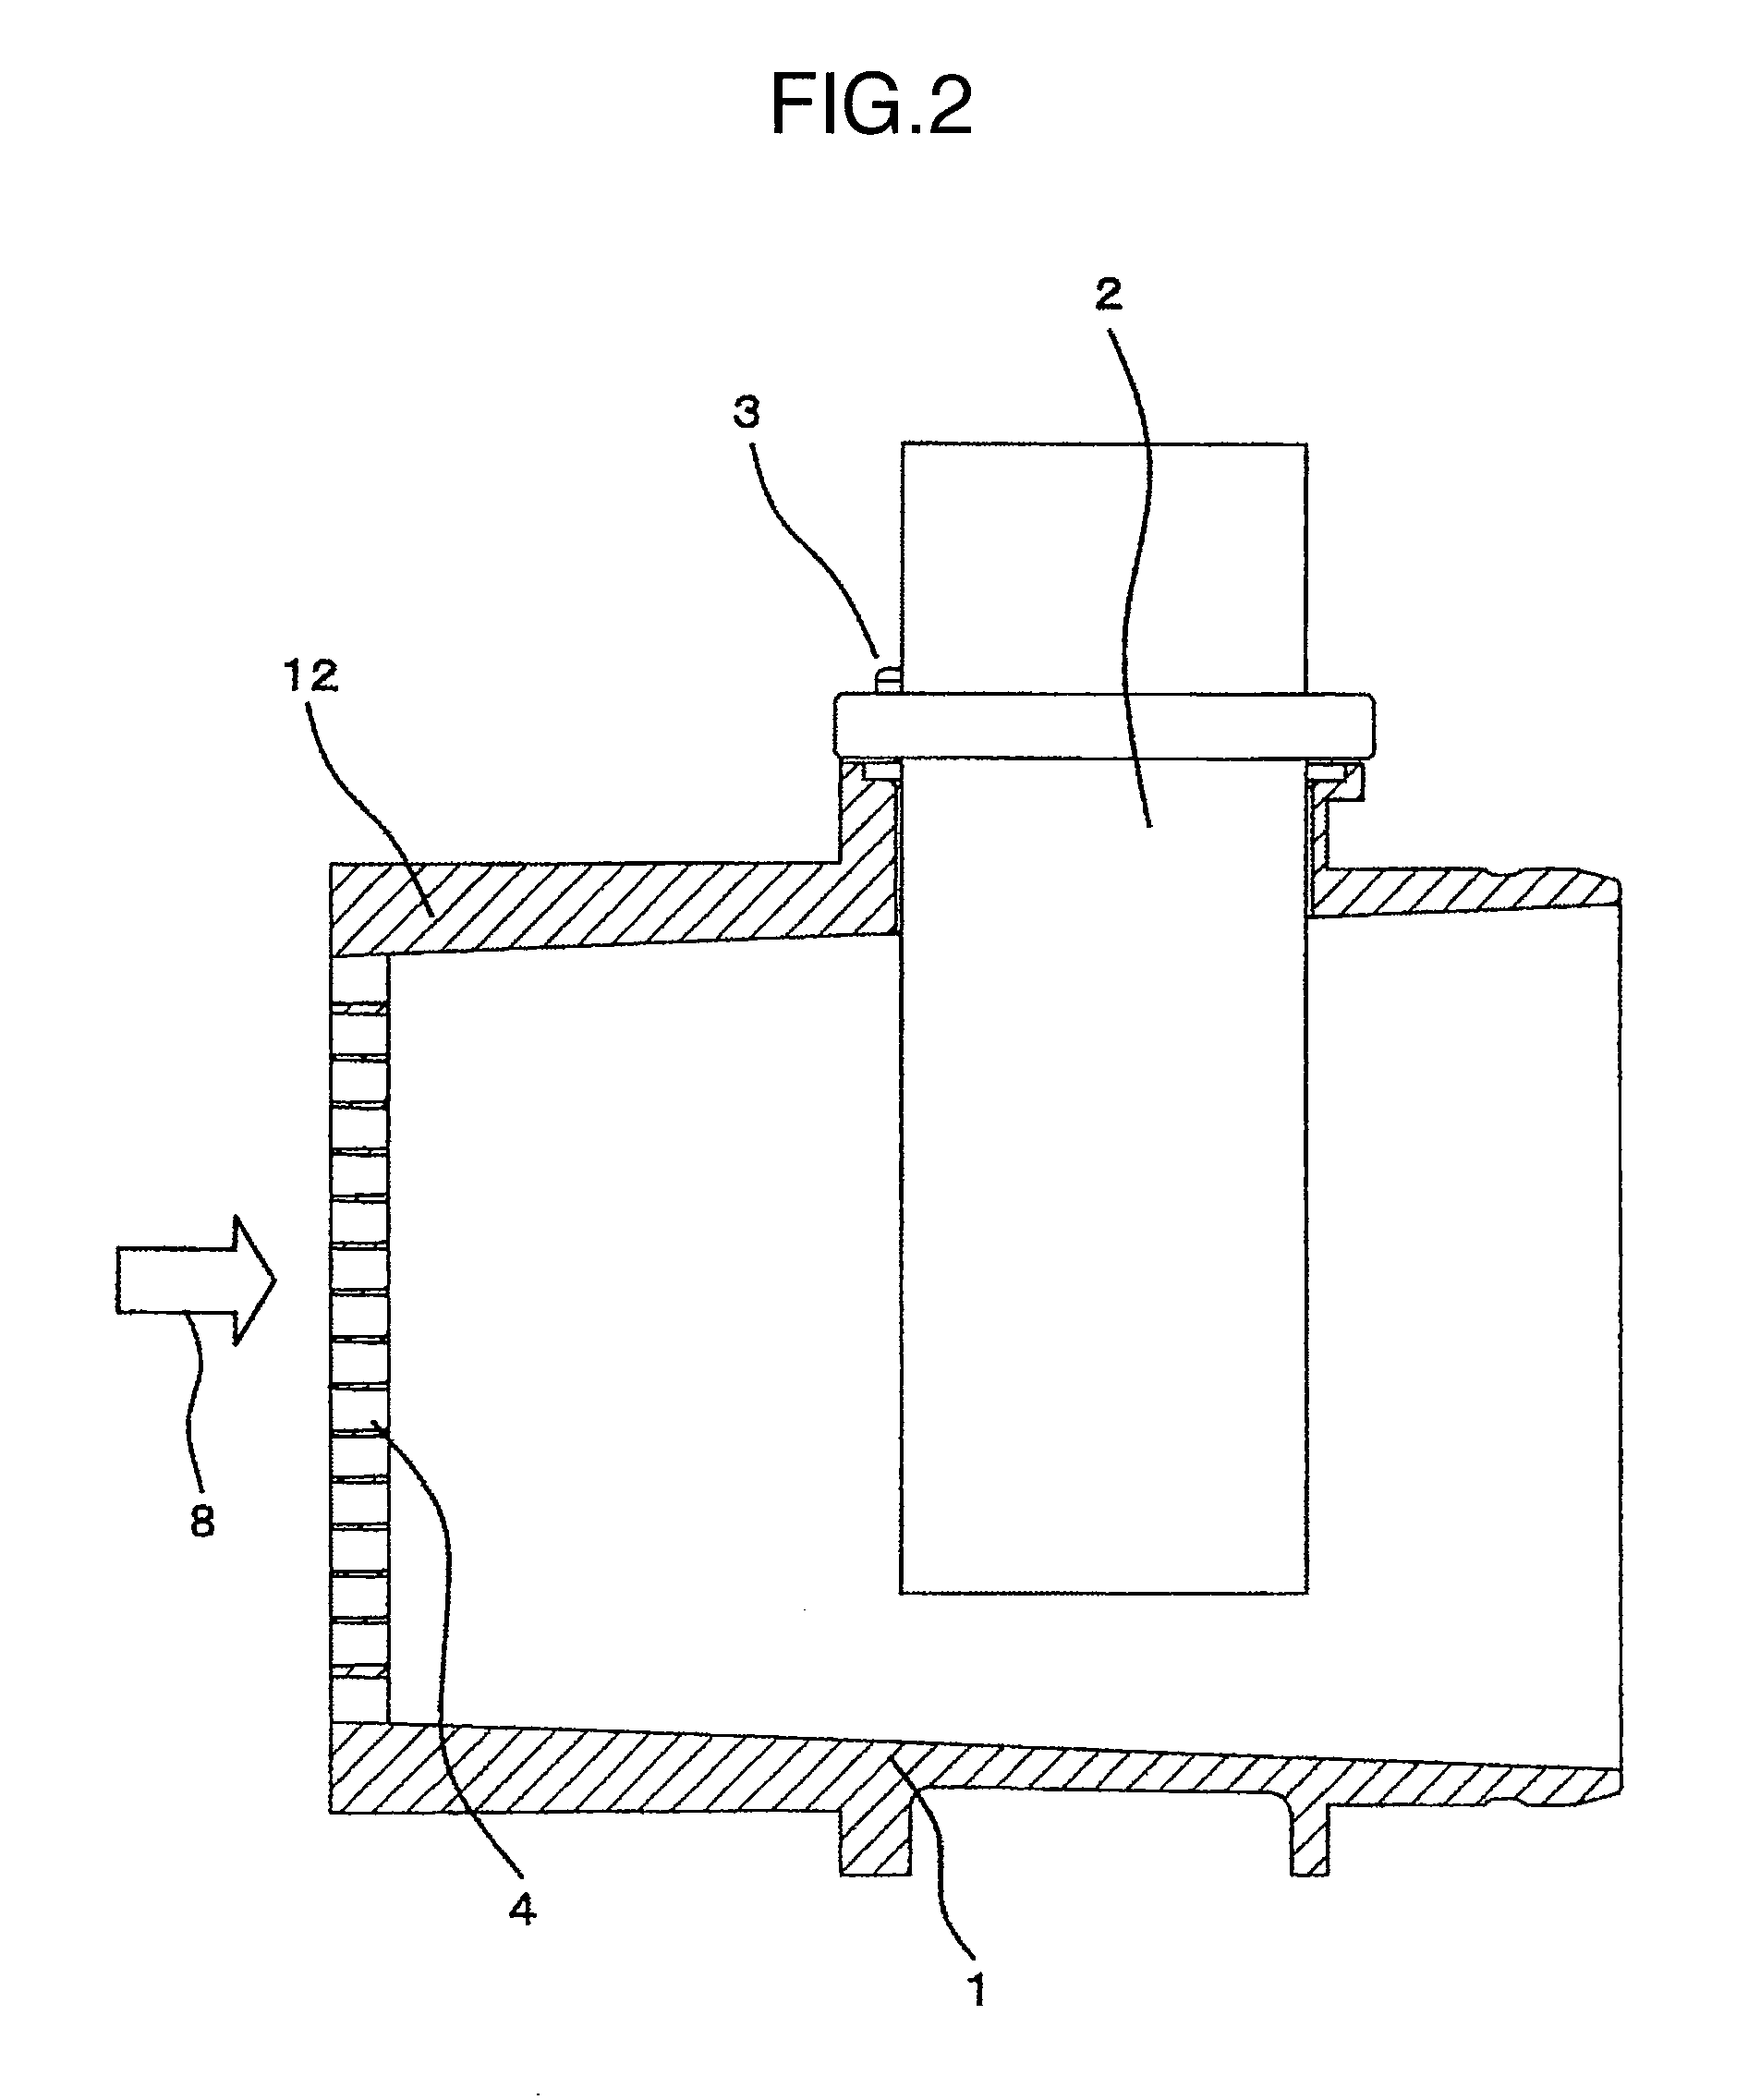 Air flow rate measuring device